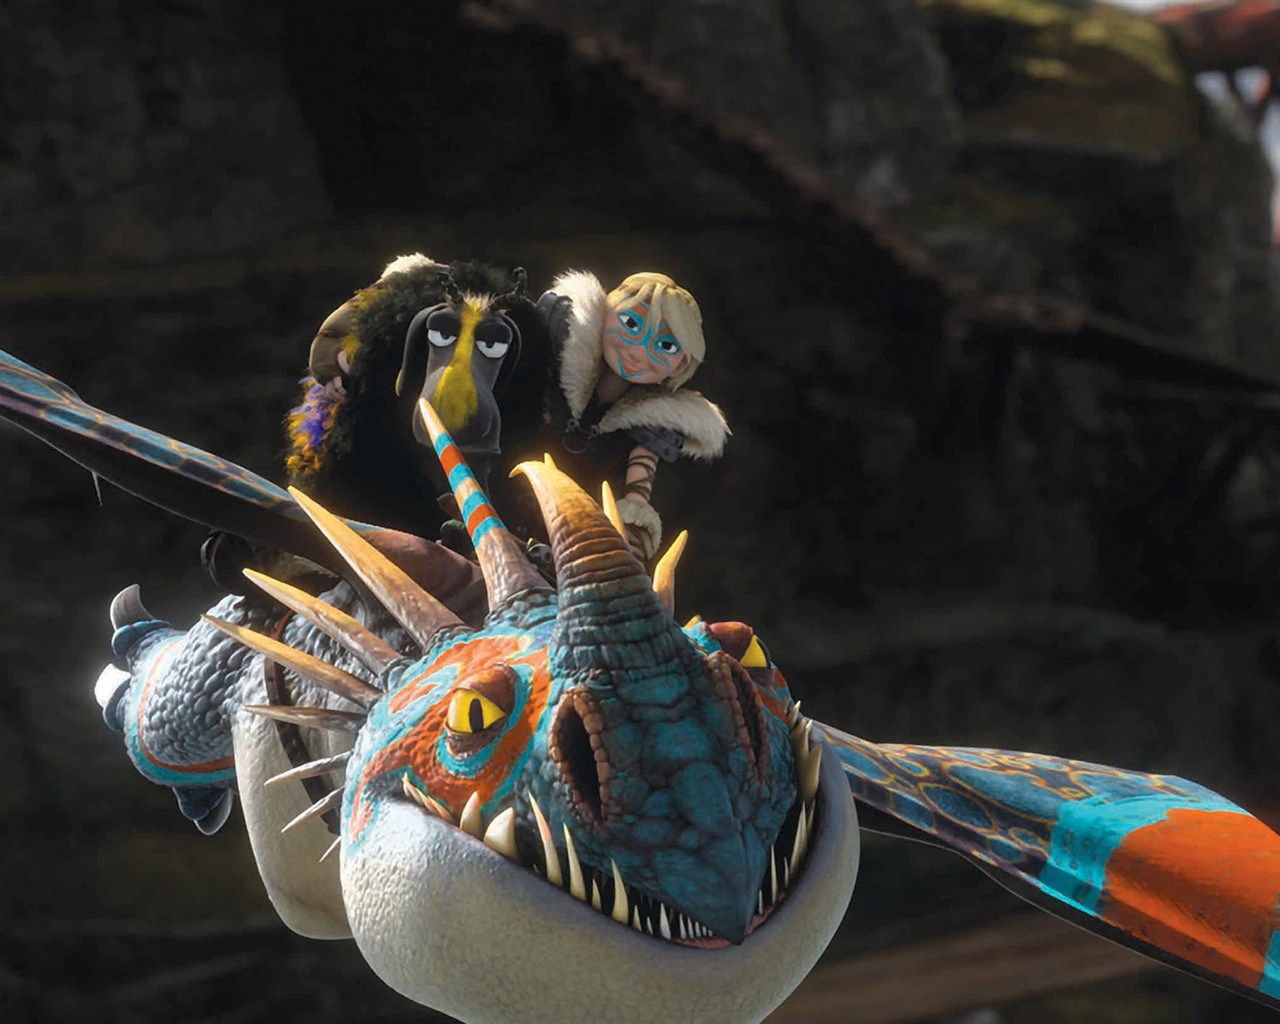 How to Train Your Dragon 2 HD wallpapers #11 - 1280x1024